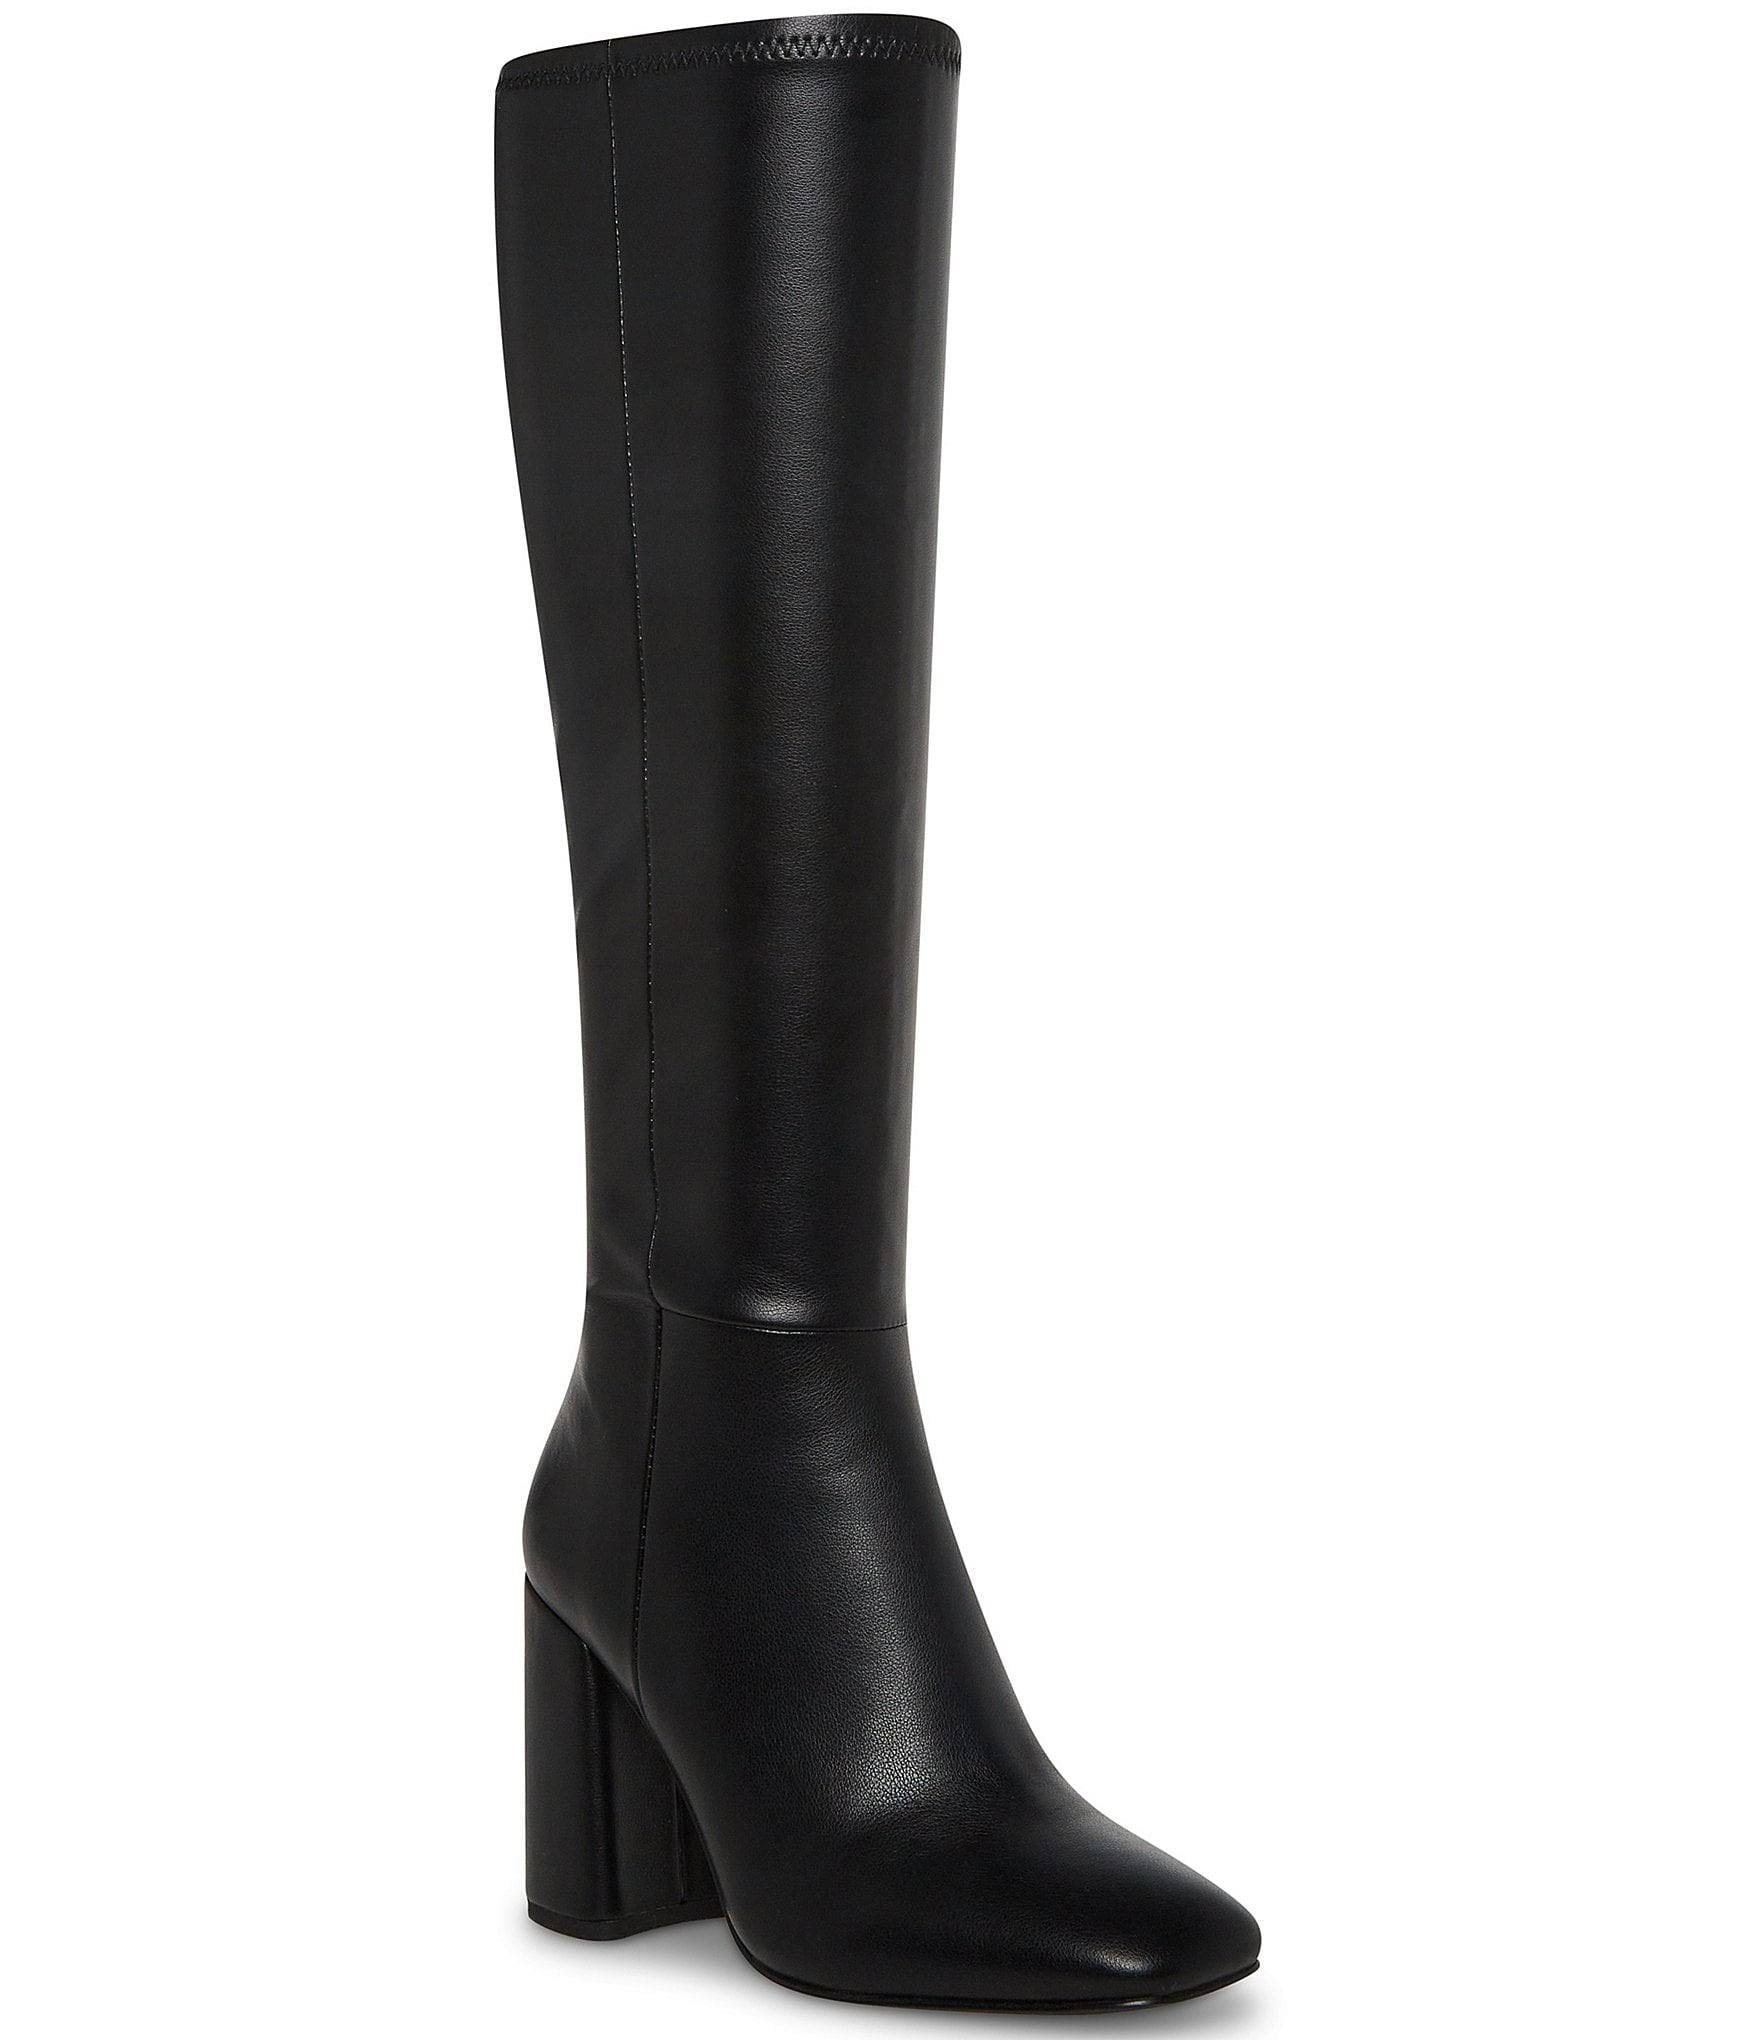 Steve Madden Knee High Boot: Chic and Comfortable Black Heels | Image